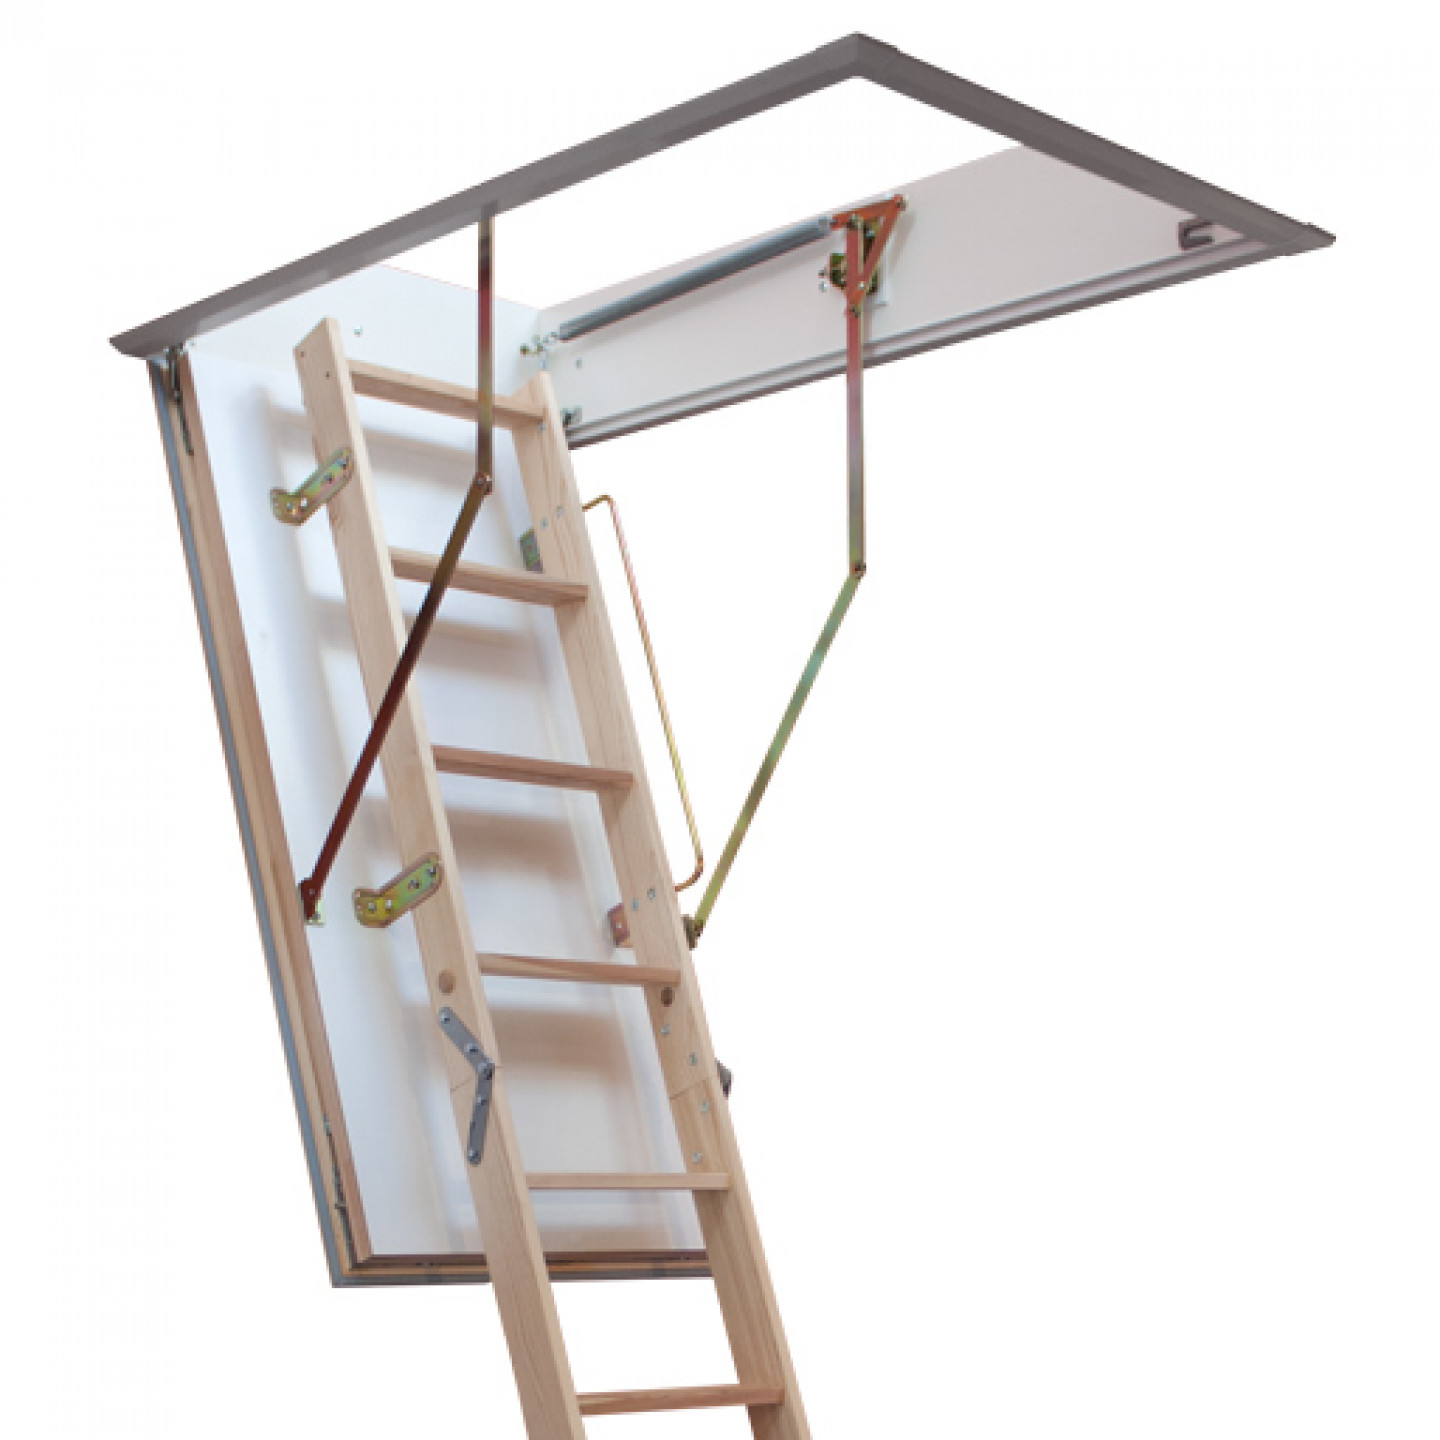 Frequently asked questions about Loft ladders